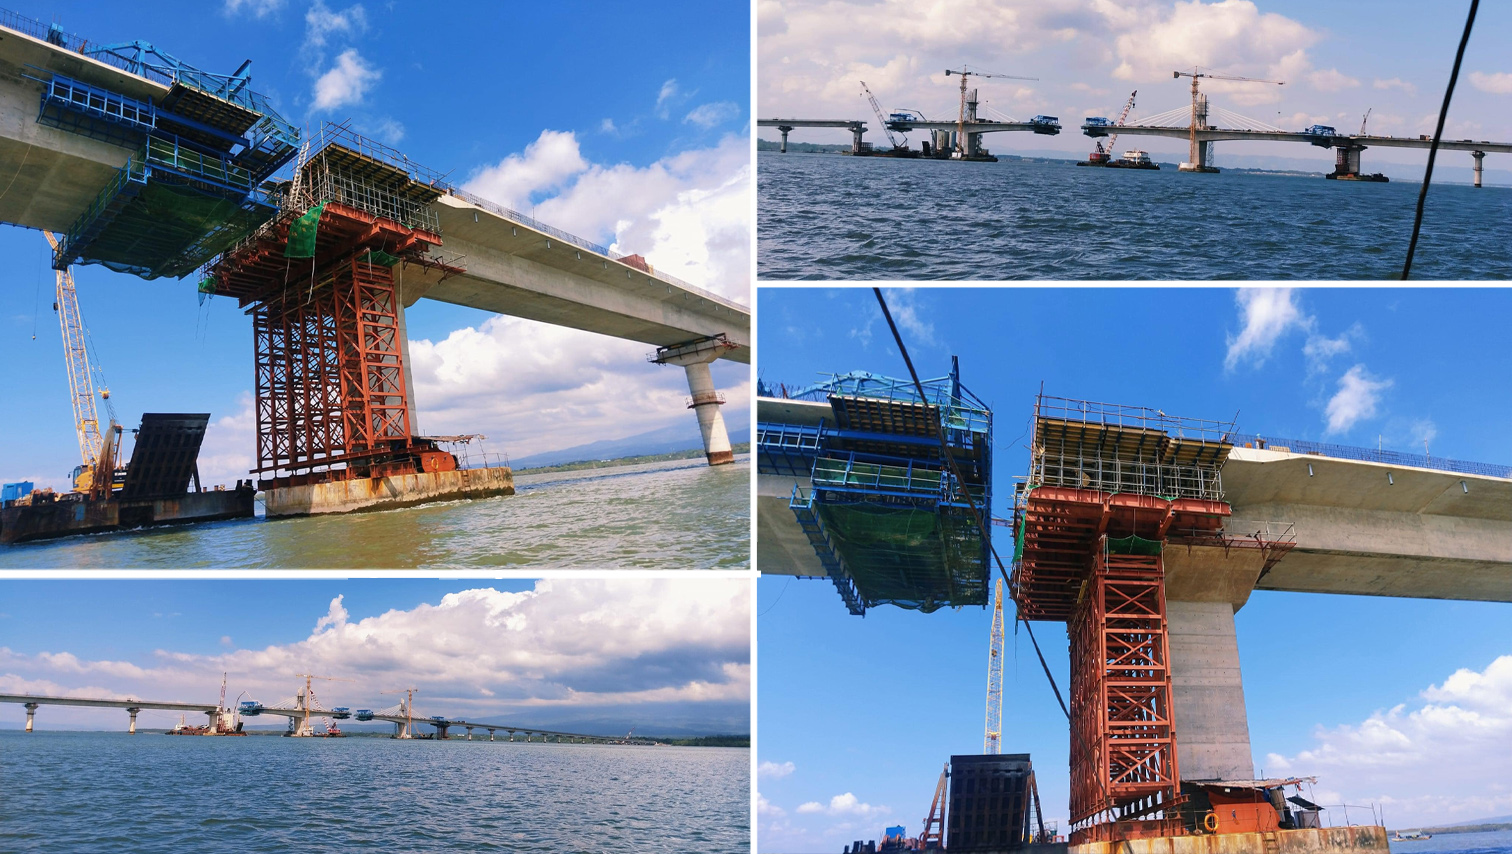 PROJECT WATCH: Panguil Bay Bridge to be connected soon